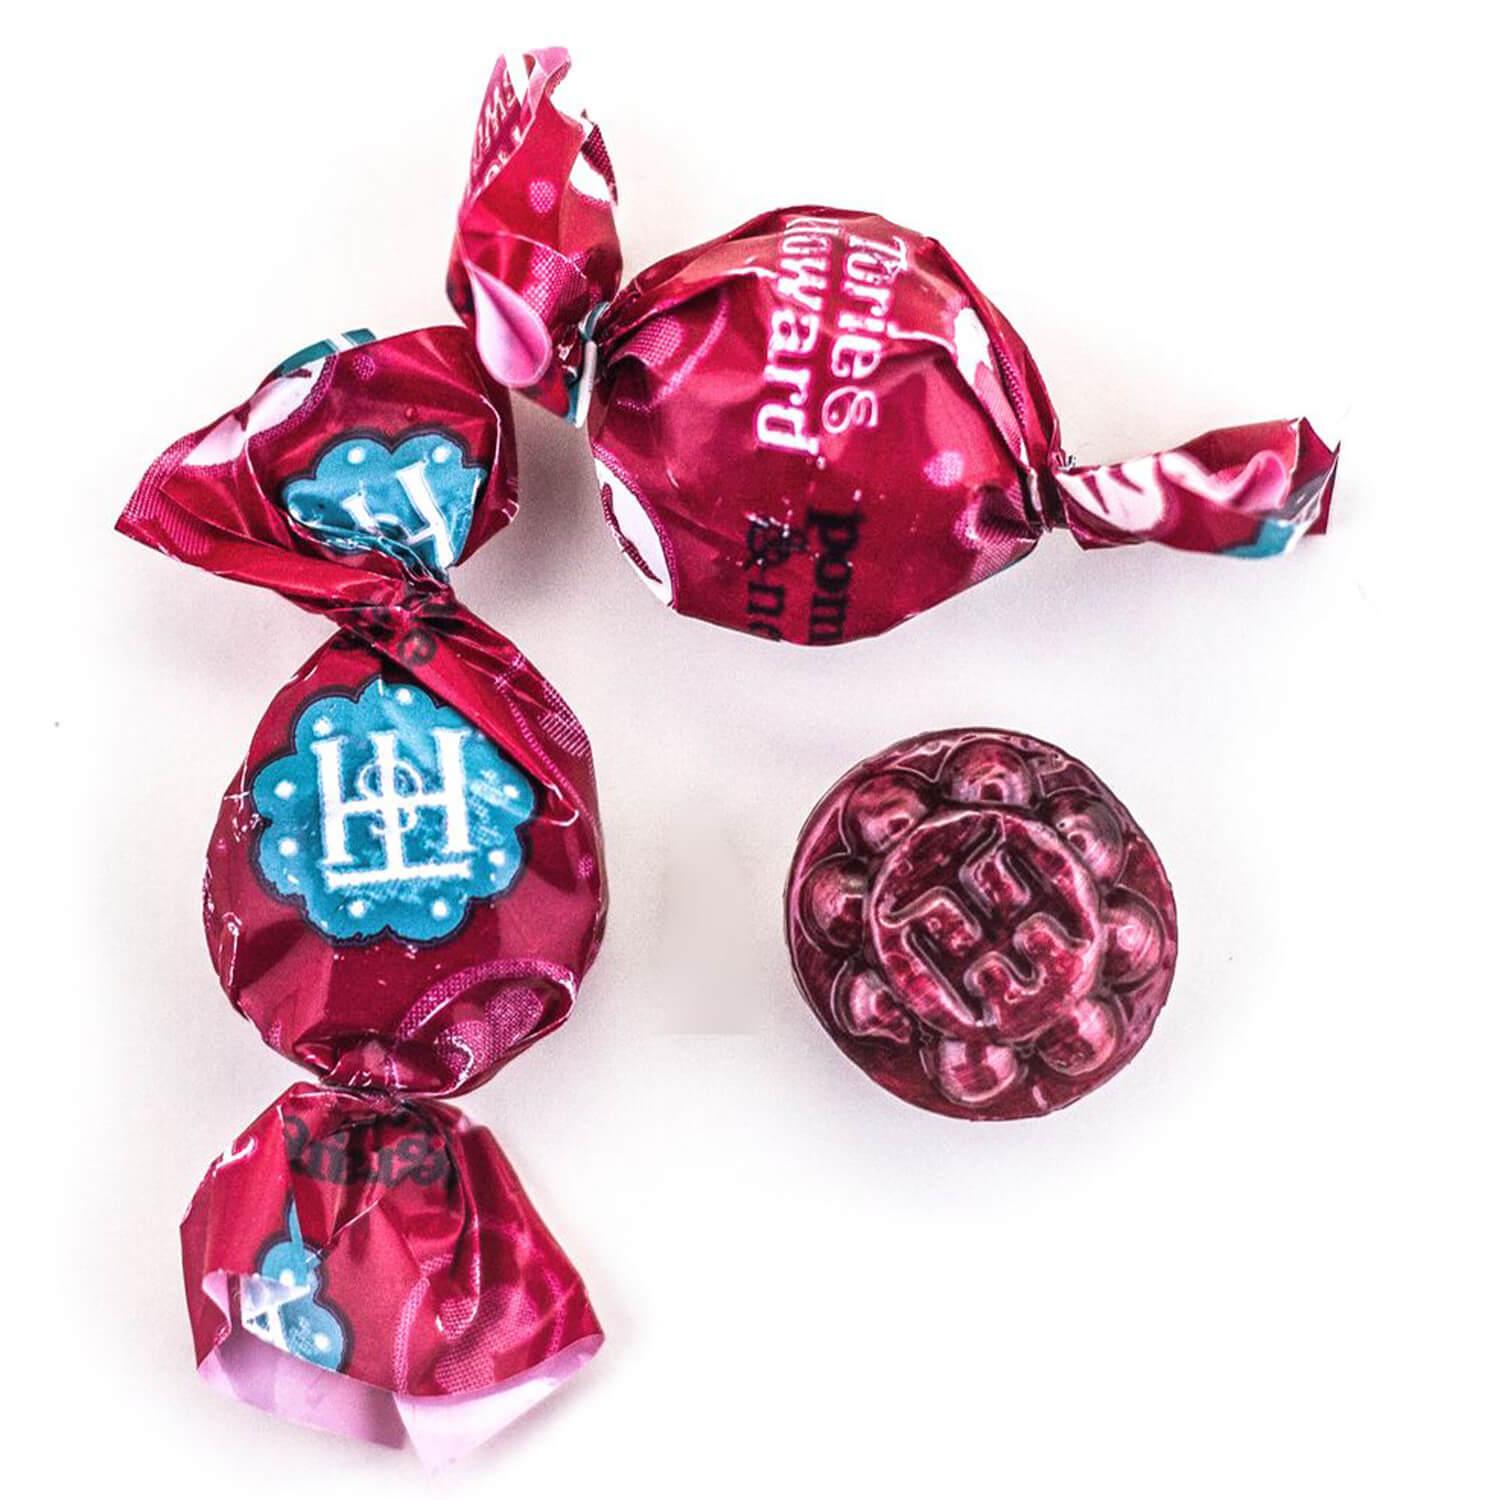 Two wrapped and one unwrapped Pomegranate & Nectarine Organic Hard Candies